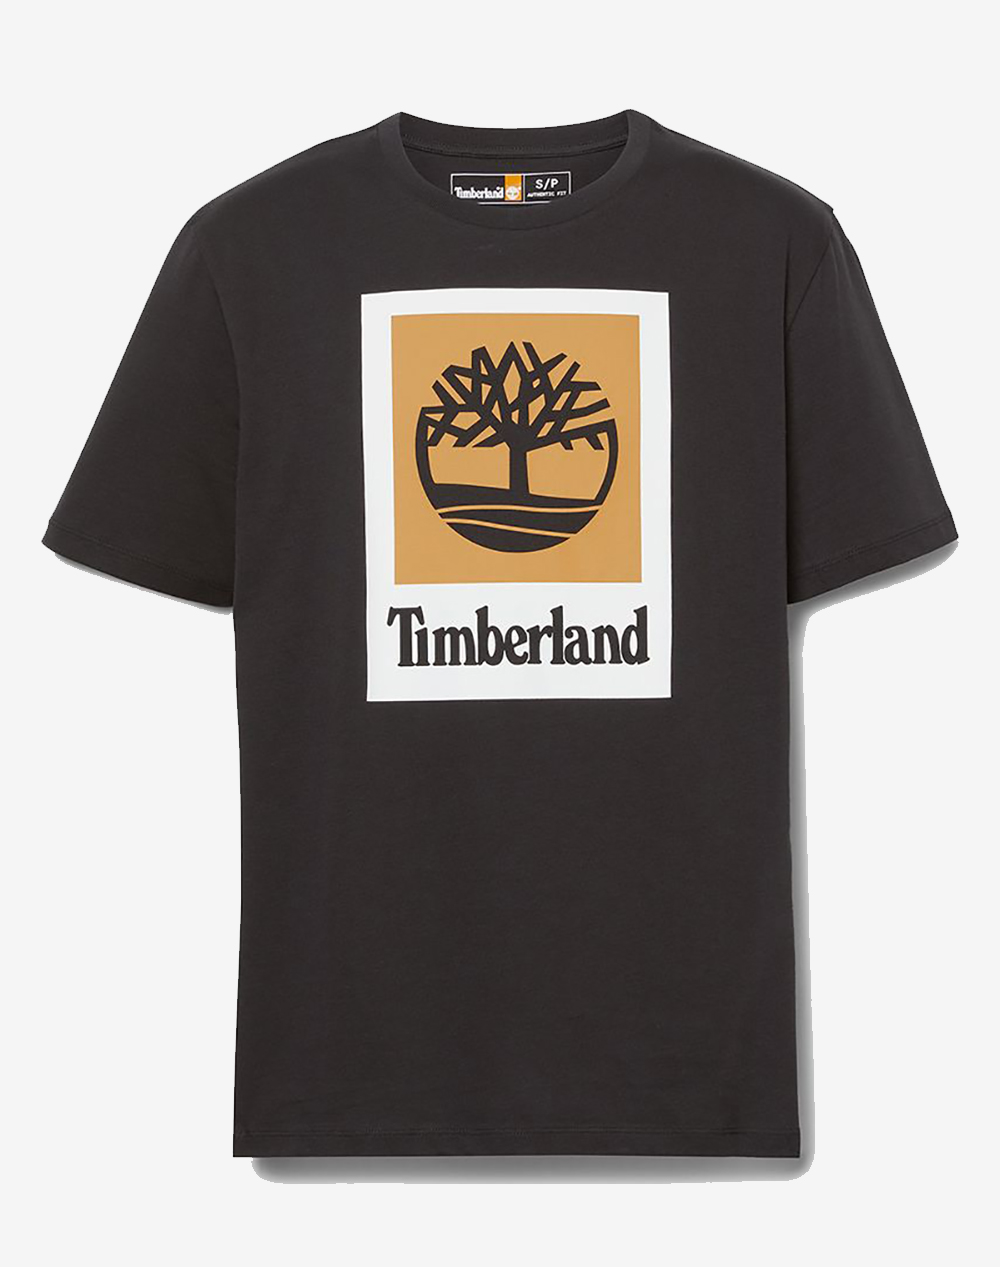 TIMBERLAND STLG Colored Short Sleeve Te TB0A5QS2-001 Black